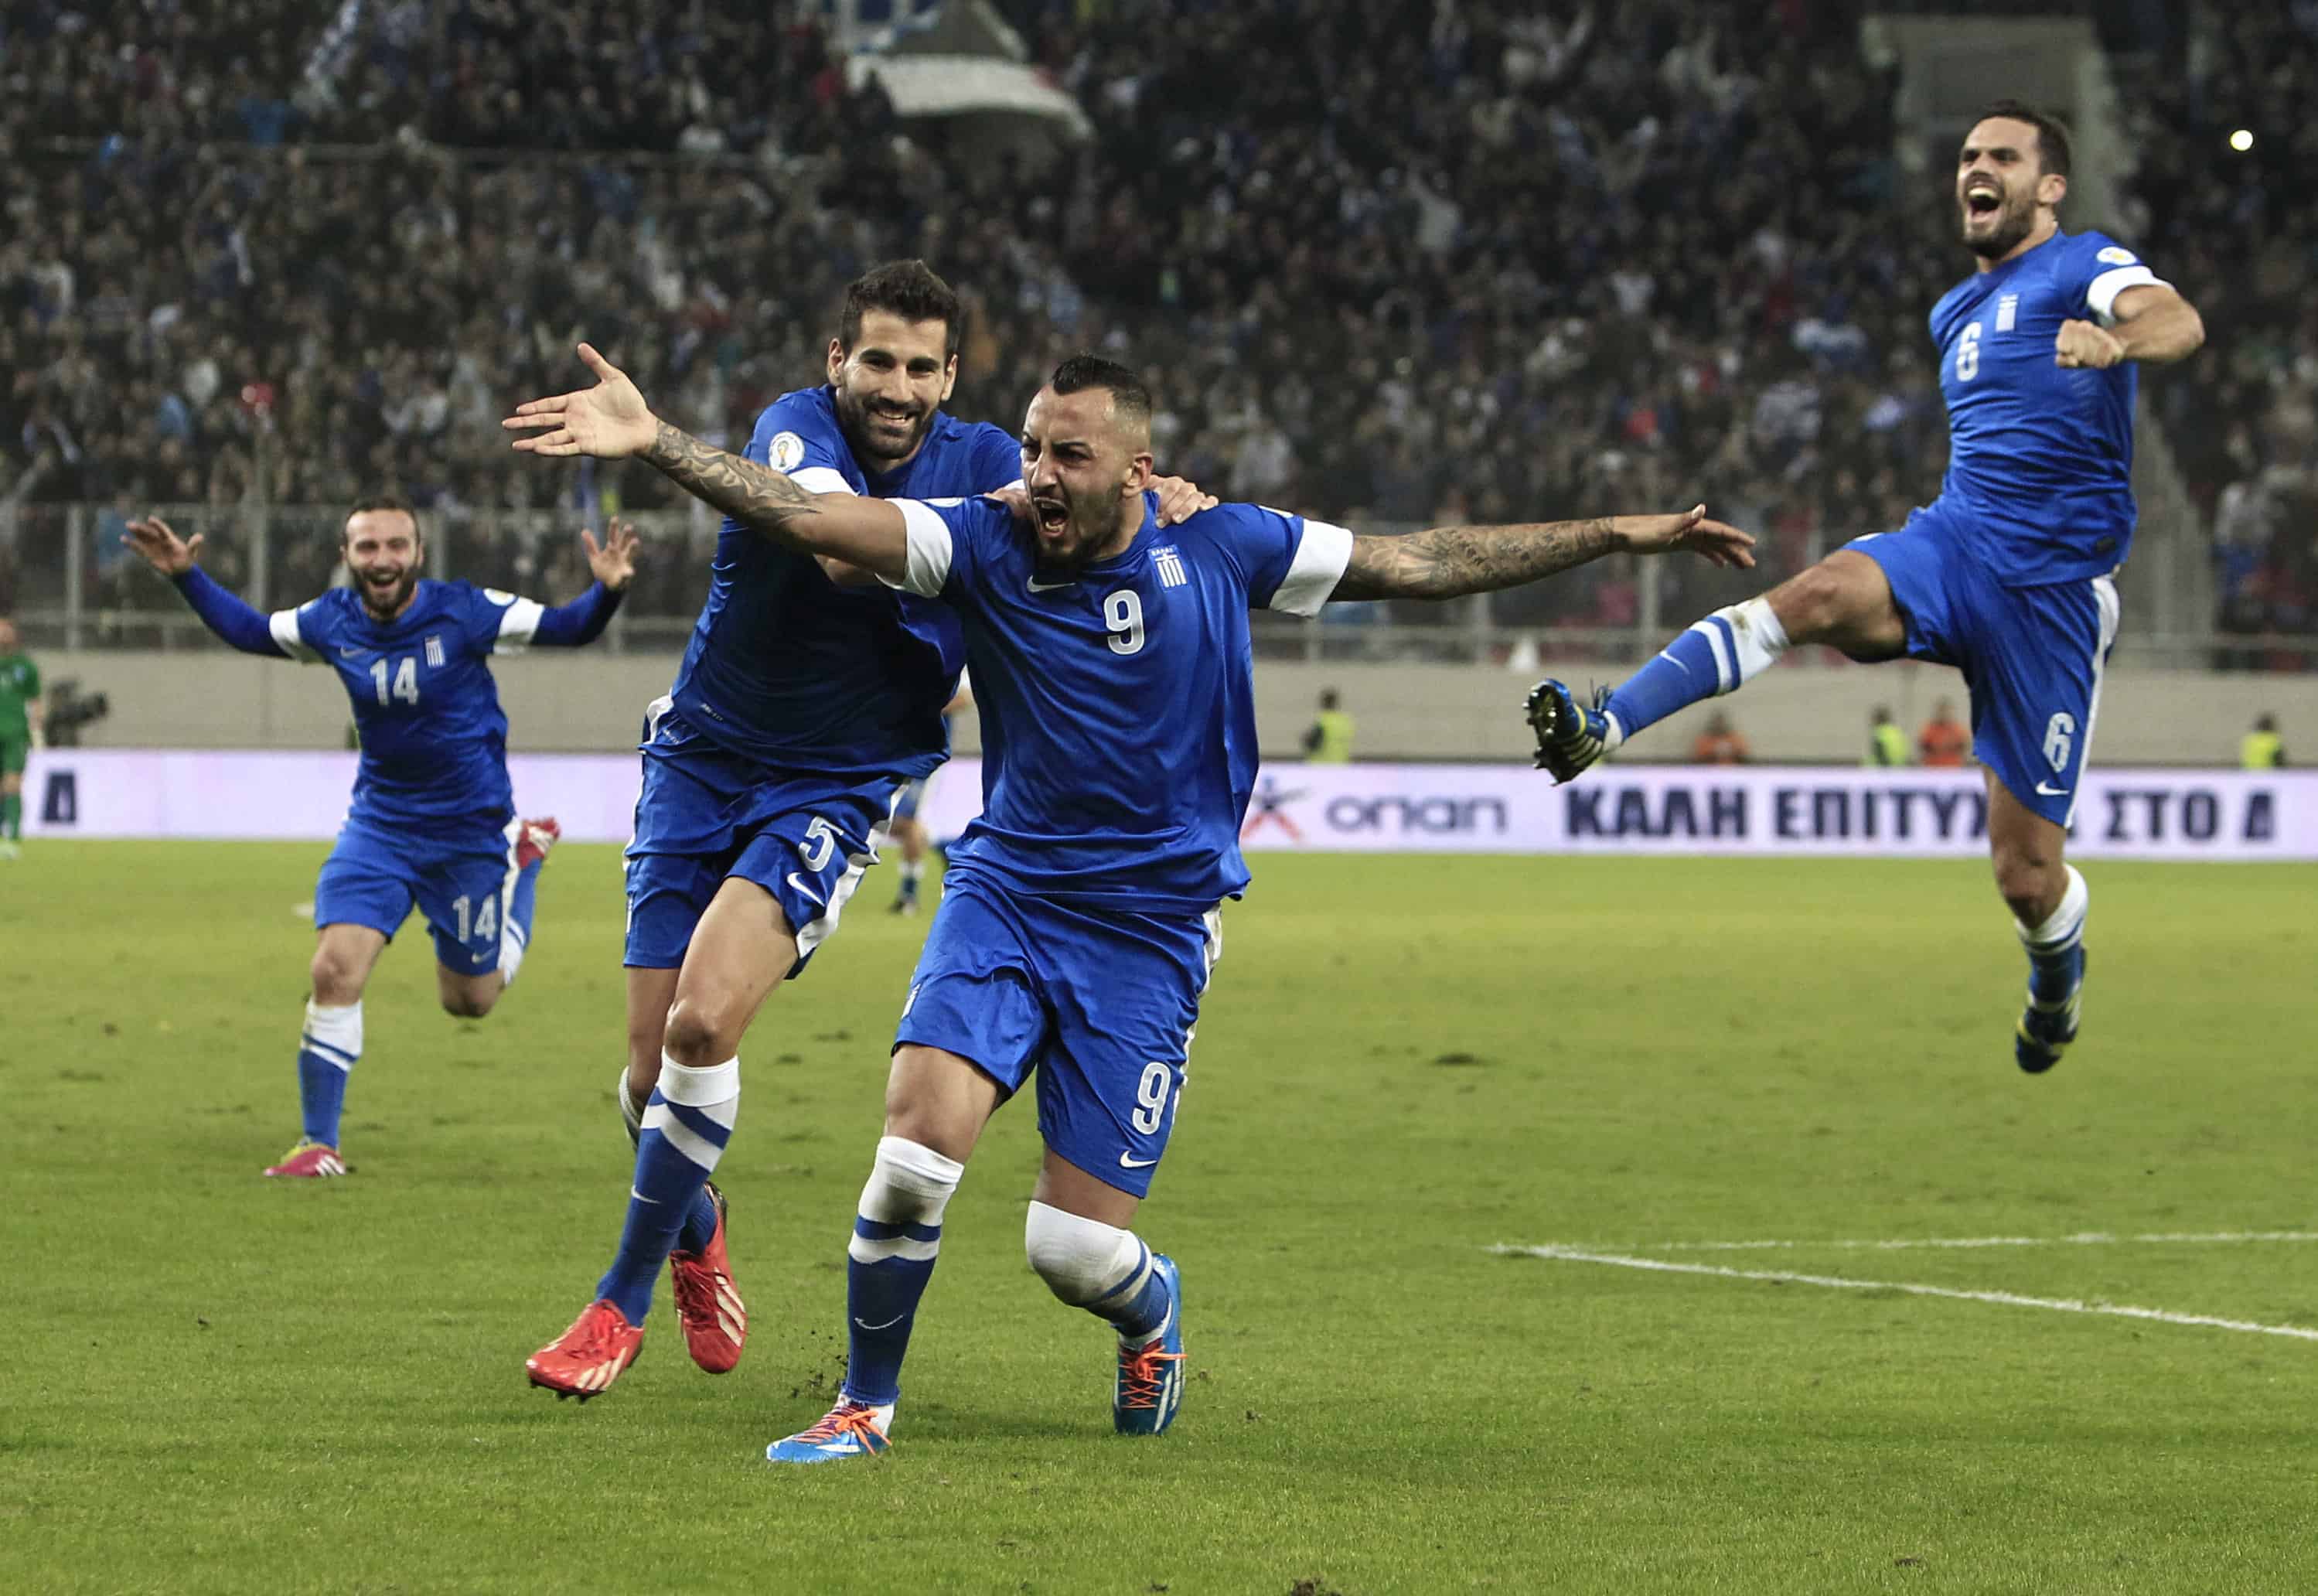 Article 6 Greece to Play Gibraltar First in World Cup Qualifying